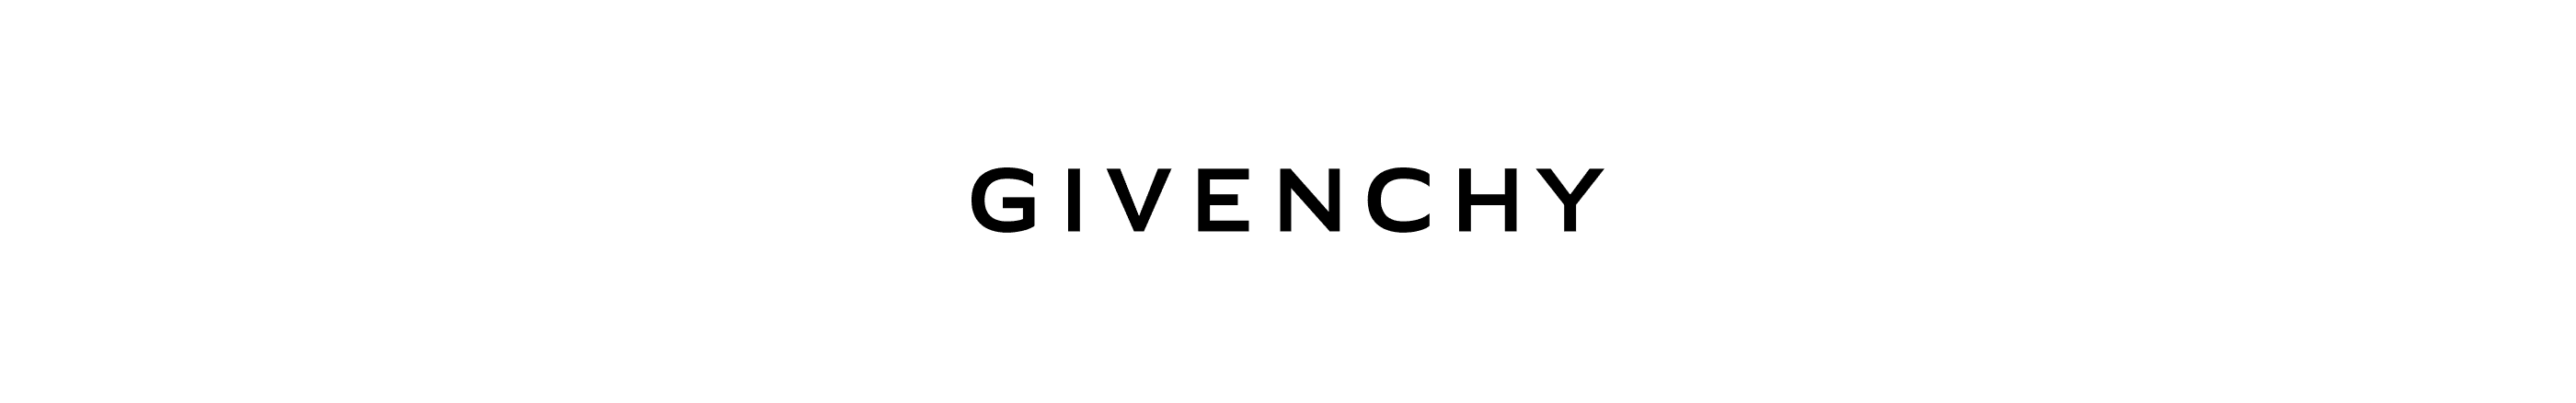 givenchyofficial 橫幅